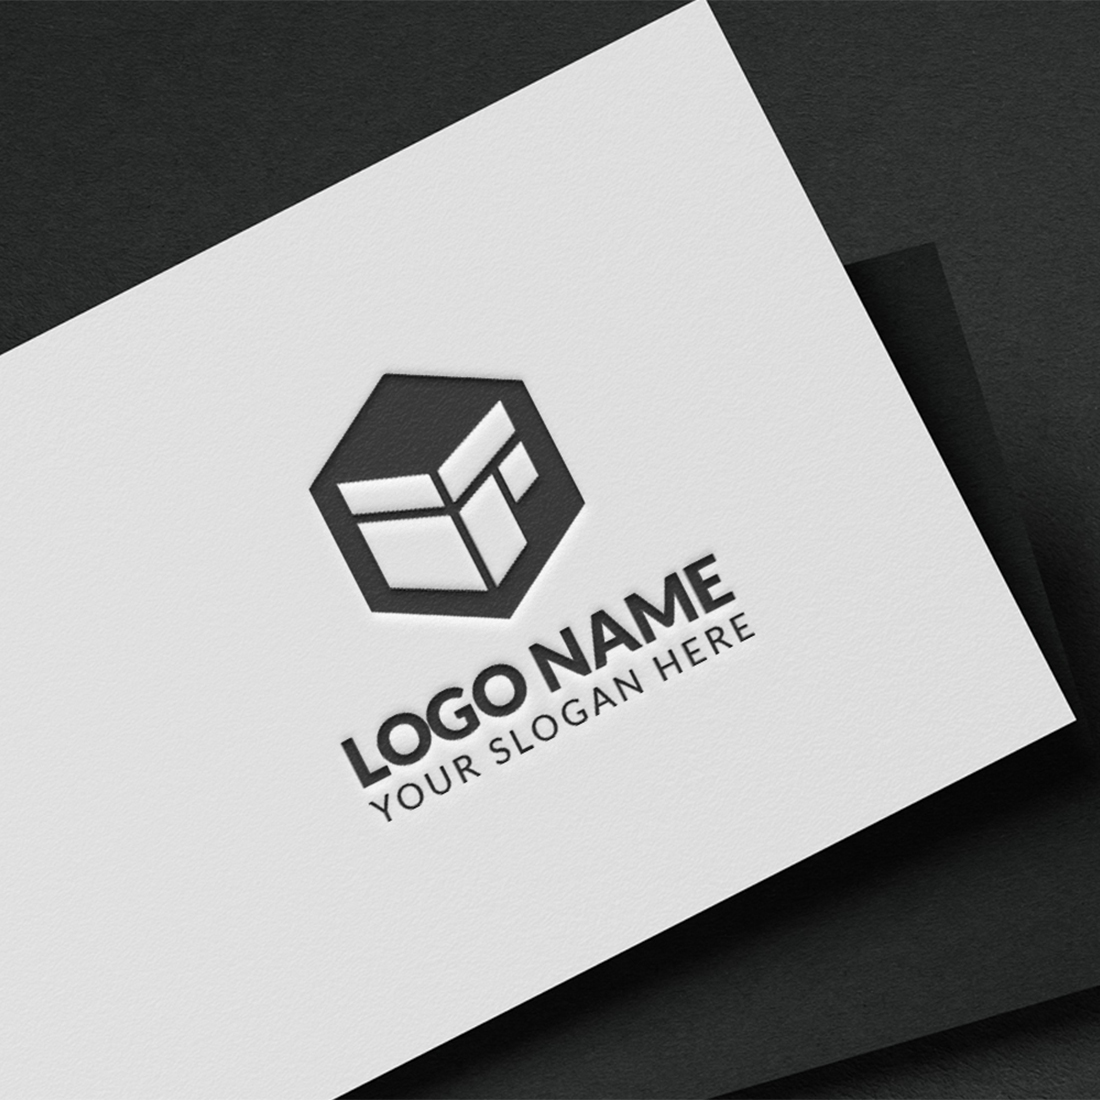 IF Technology Logo Design Template cover image.